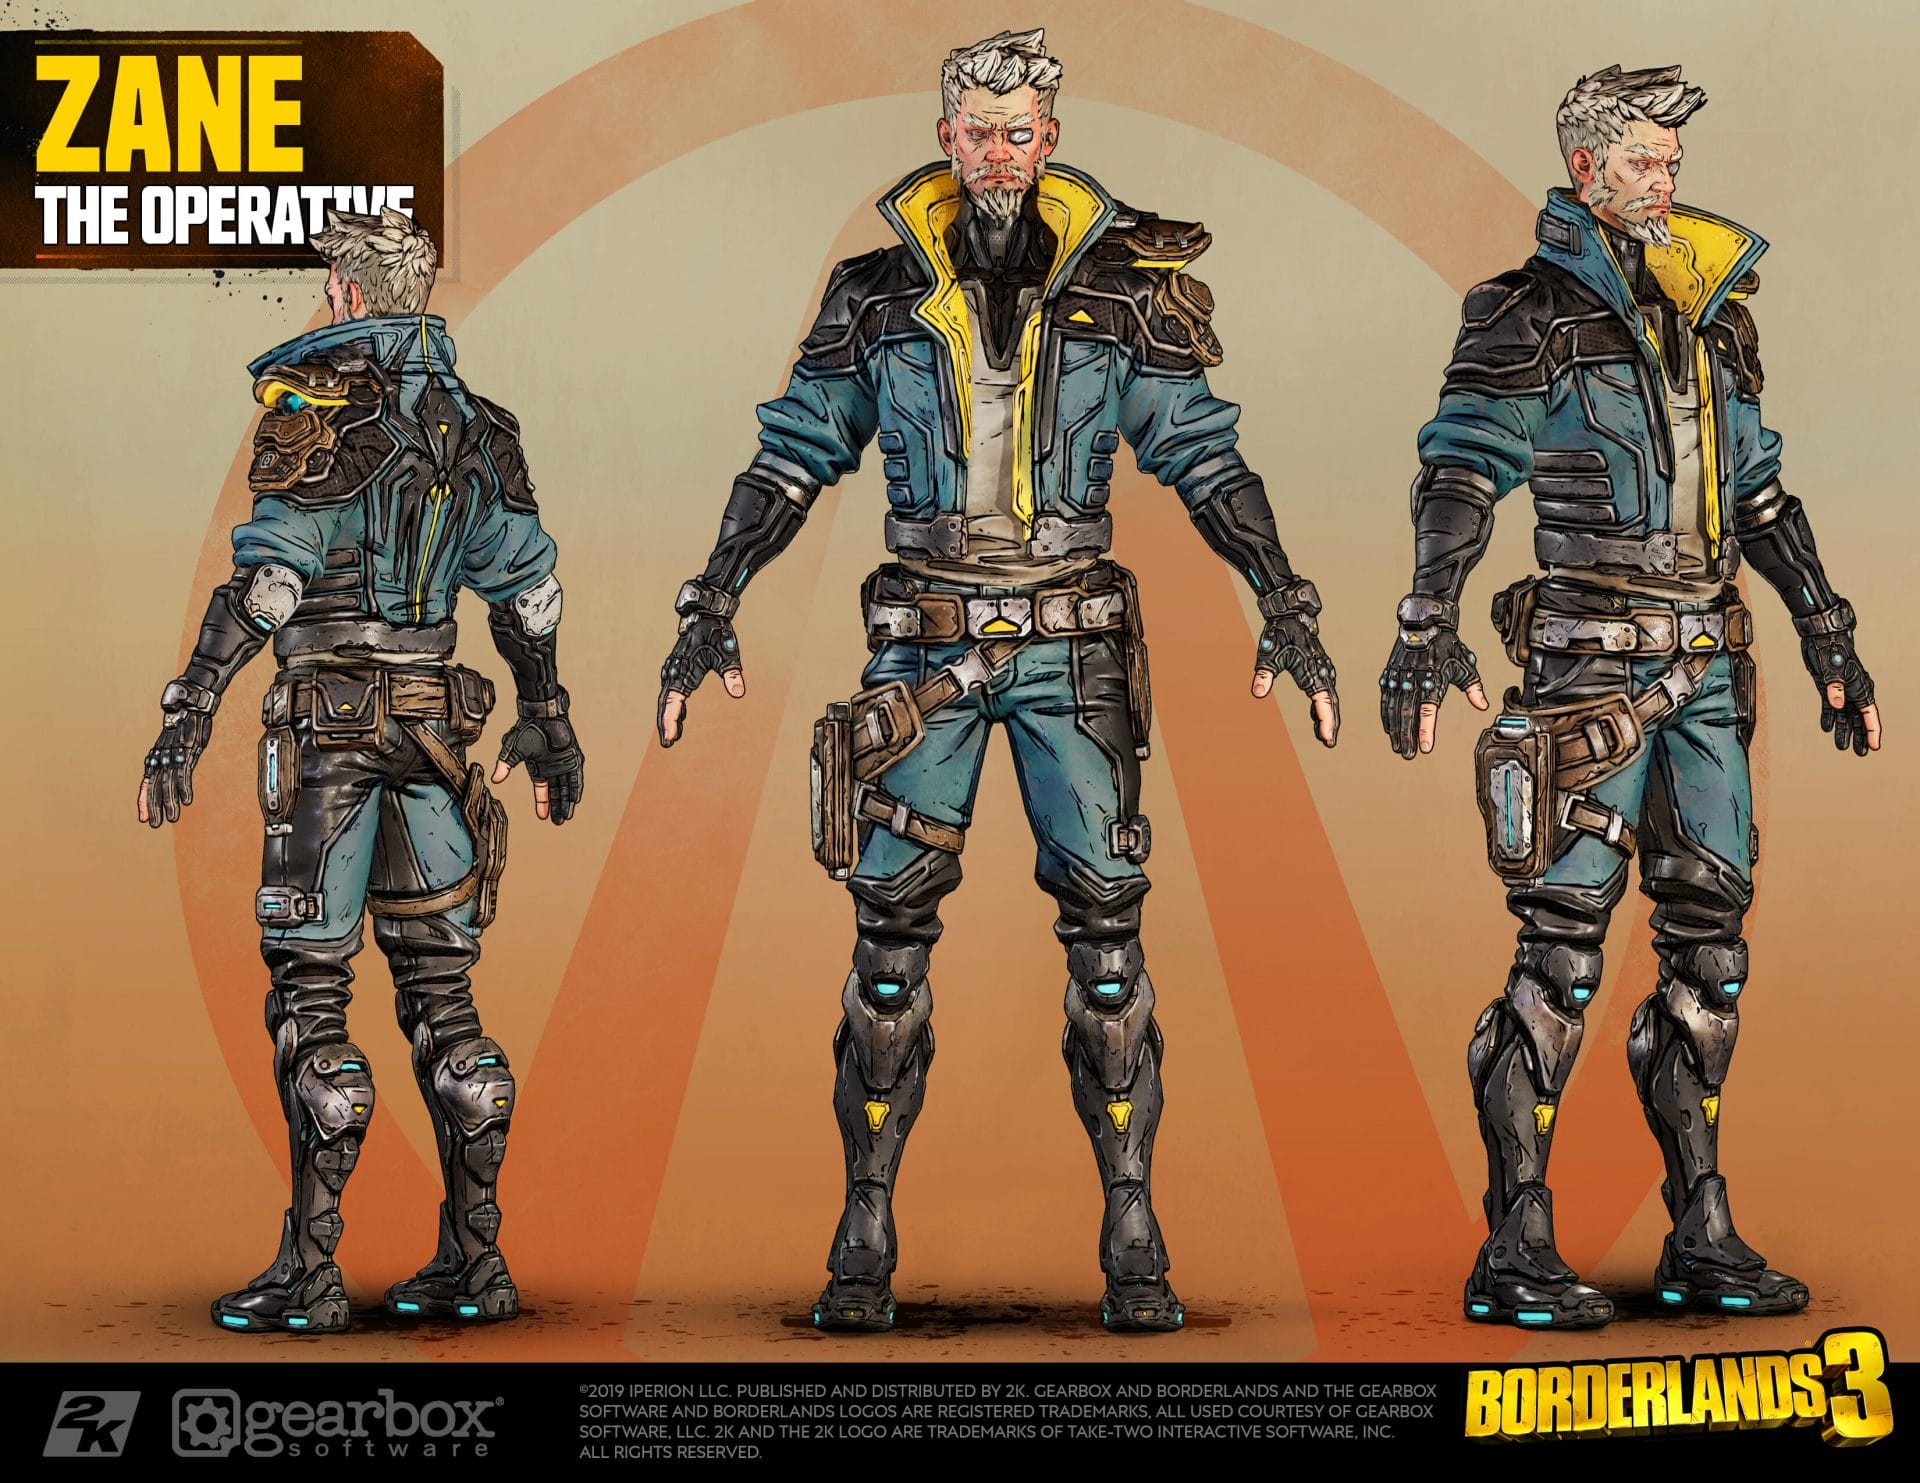 check-out-borderlands-3-s-vault-hunters-and-win-5-000-with-your-best-cosplay